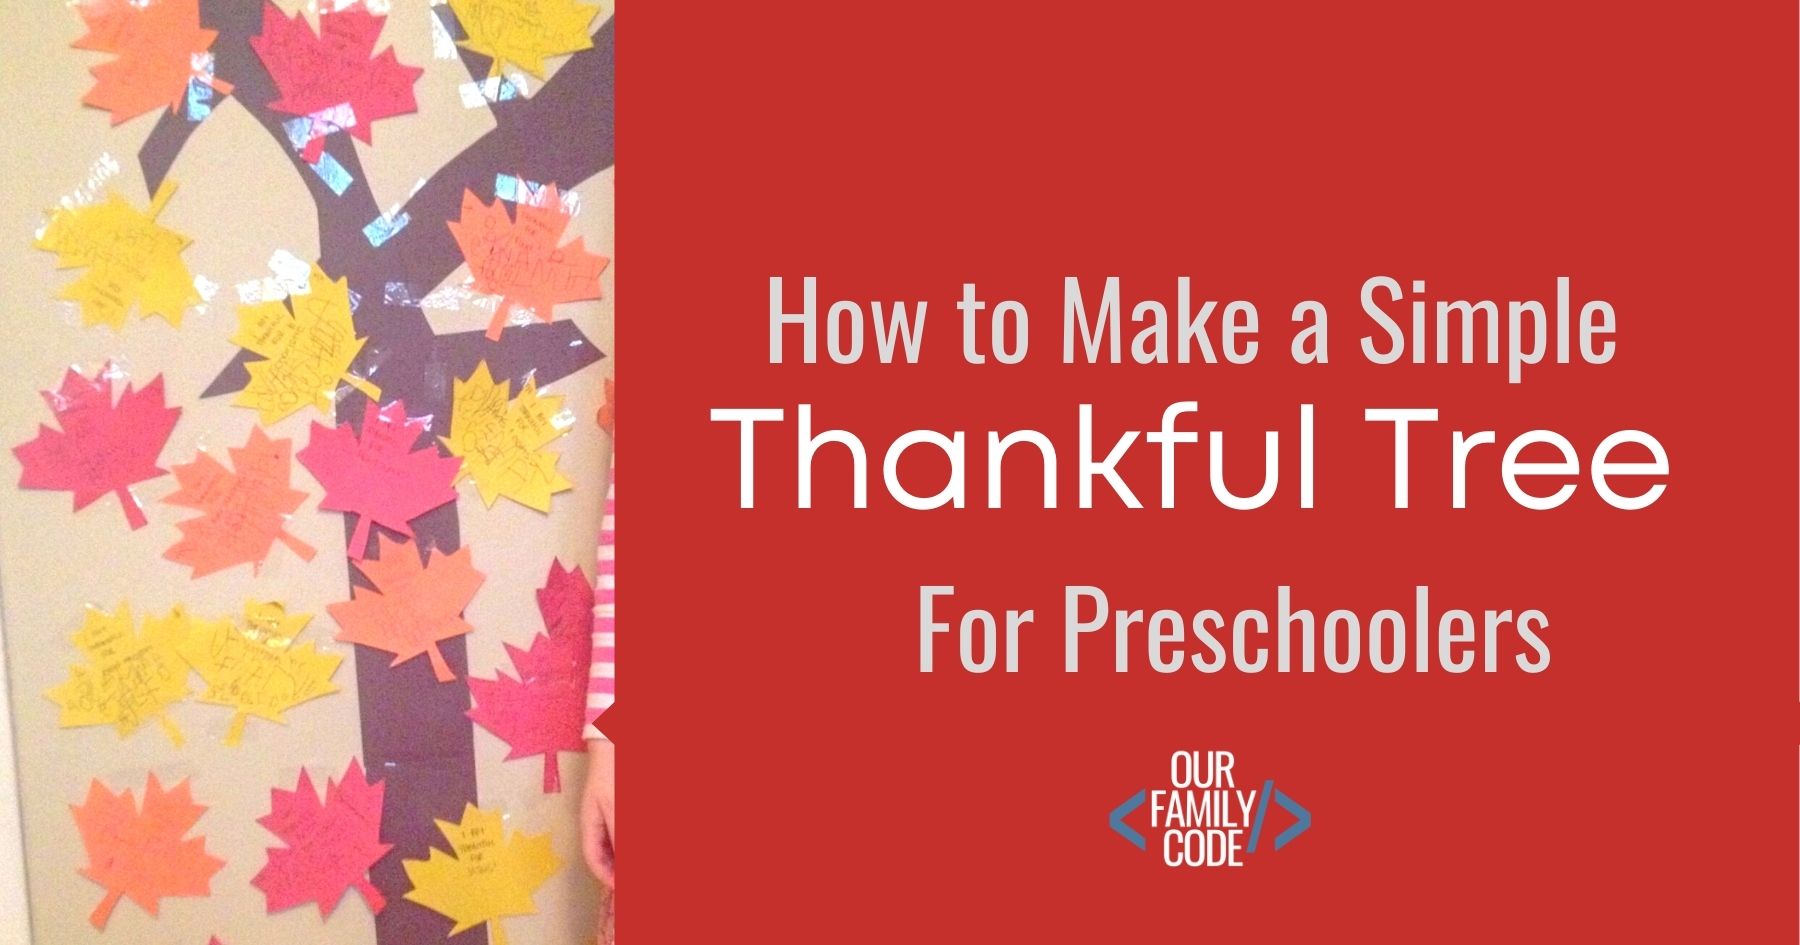 Thanksgiving Kid Craft - How to Make a Simple Thankful Tree for Preschoolers #ThanksgivingKidCraft #Fallkidsactivities #thankfultree #kidsThanksgivingactivities #fallactivities #Iamthankfulfor #preschoolcrafts #fallpreschooleractivities